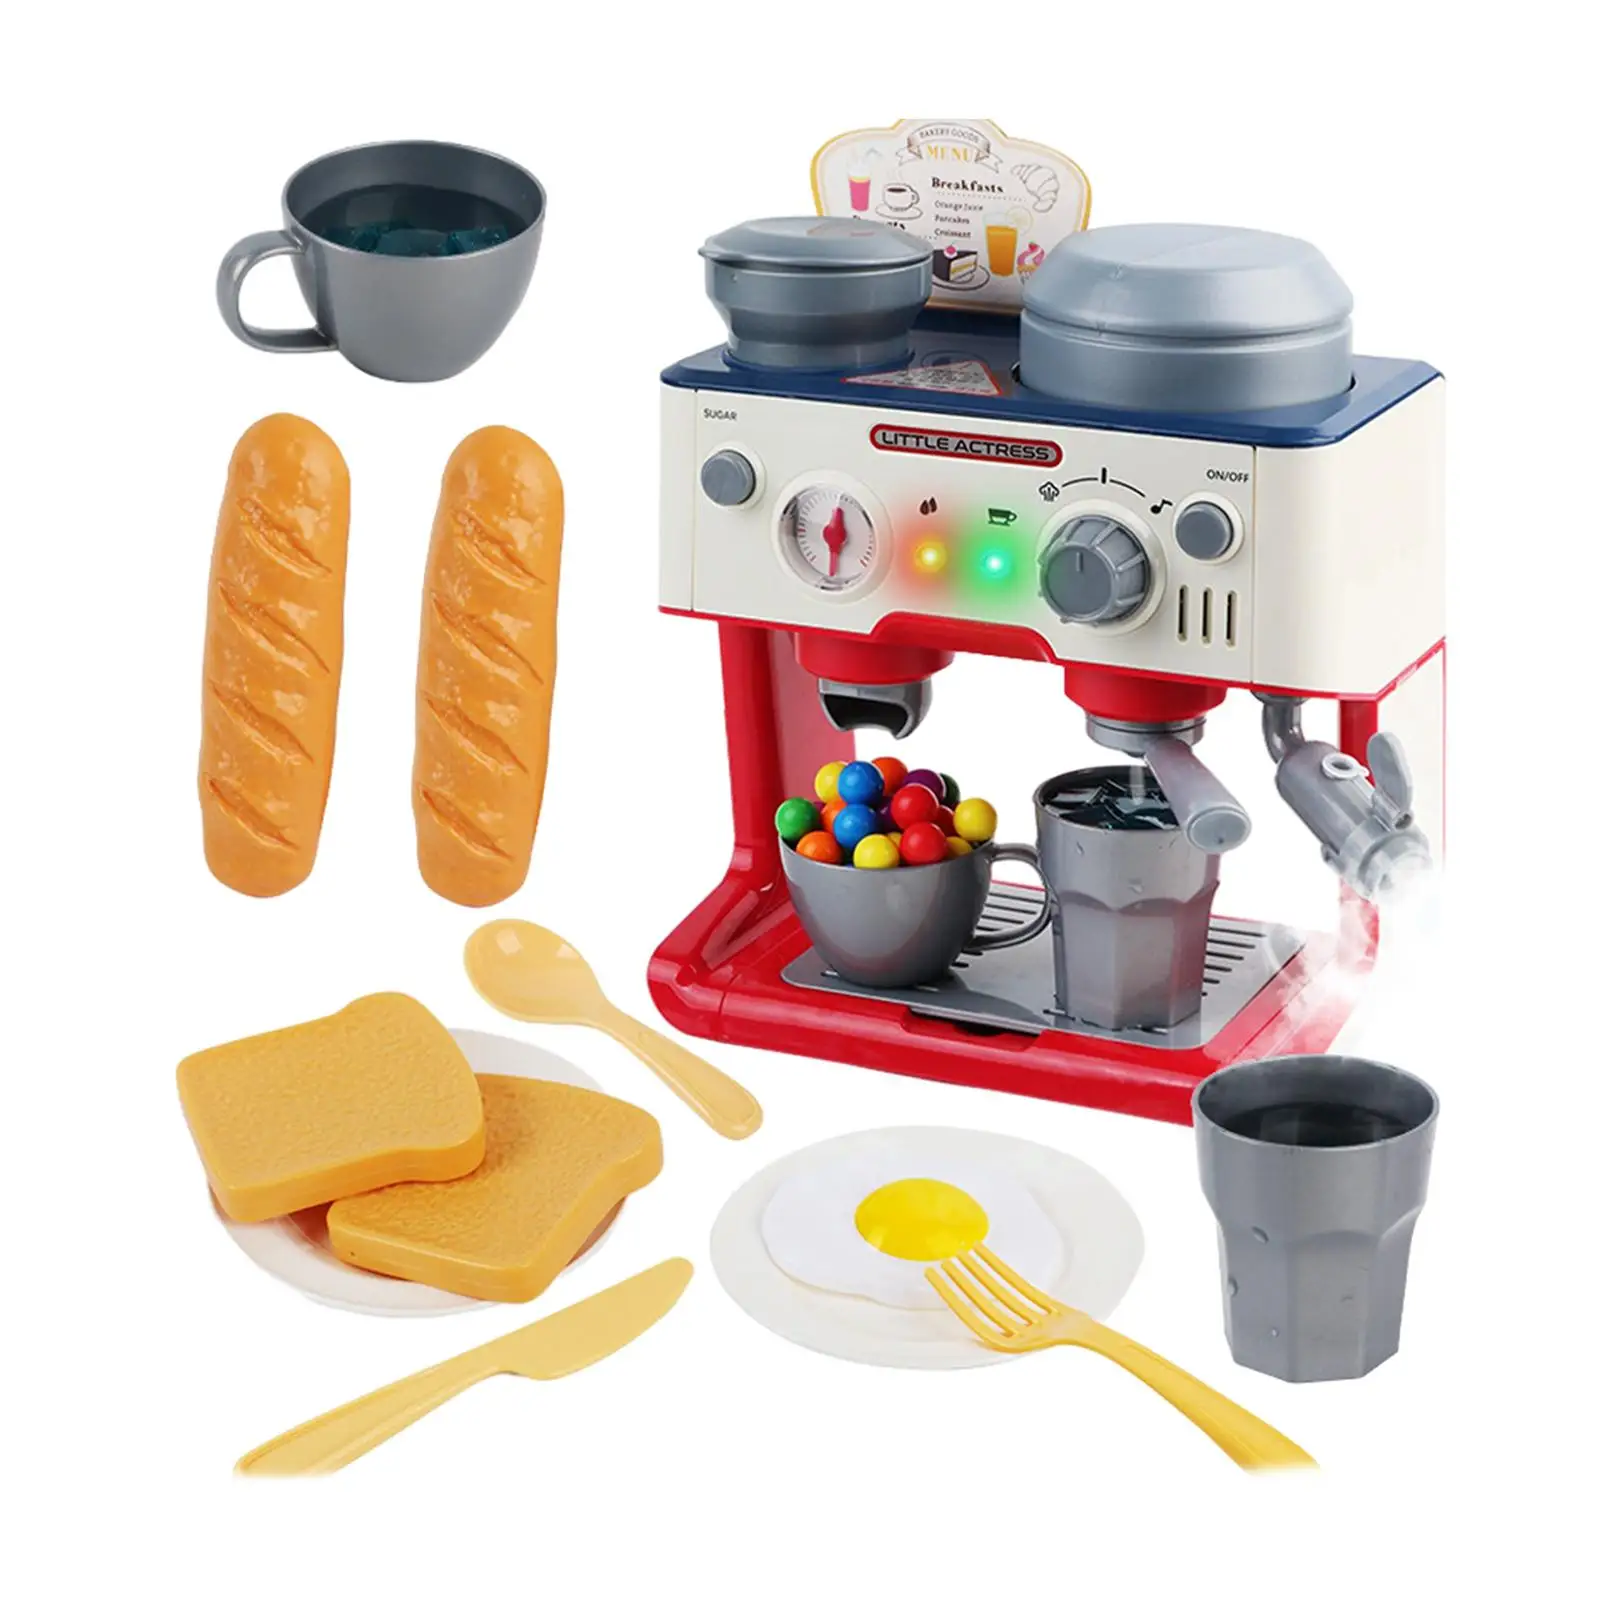 Simulation Coffee Maker Toys Pretend Cooking with Lights Upgraded Toy Coffee Set for Children Girls Kids Boys Birthday Gifts